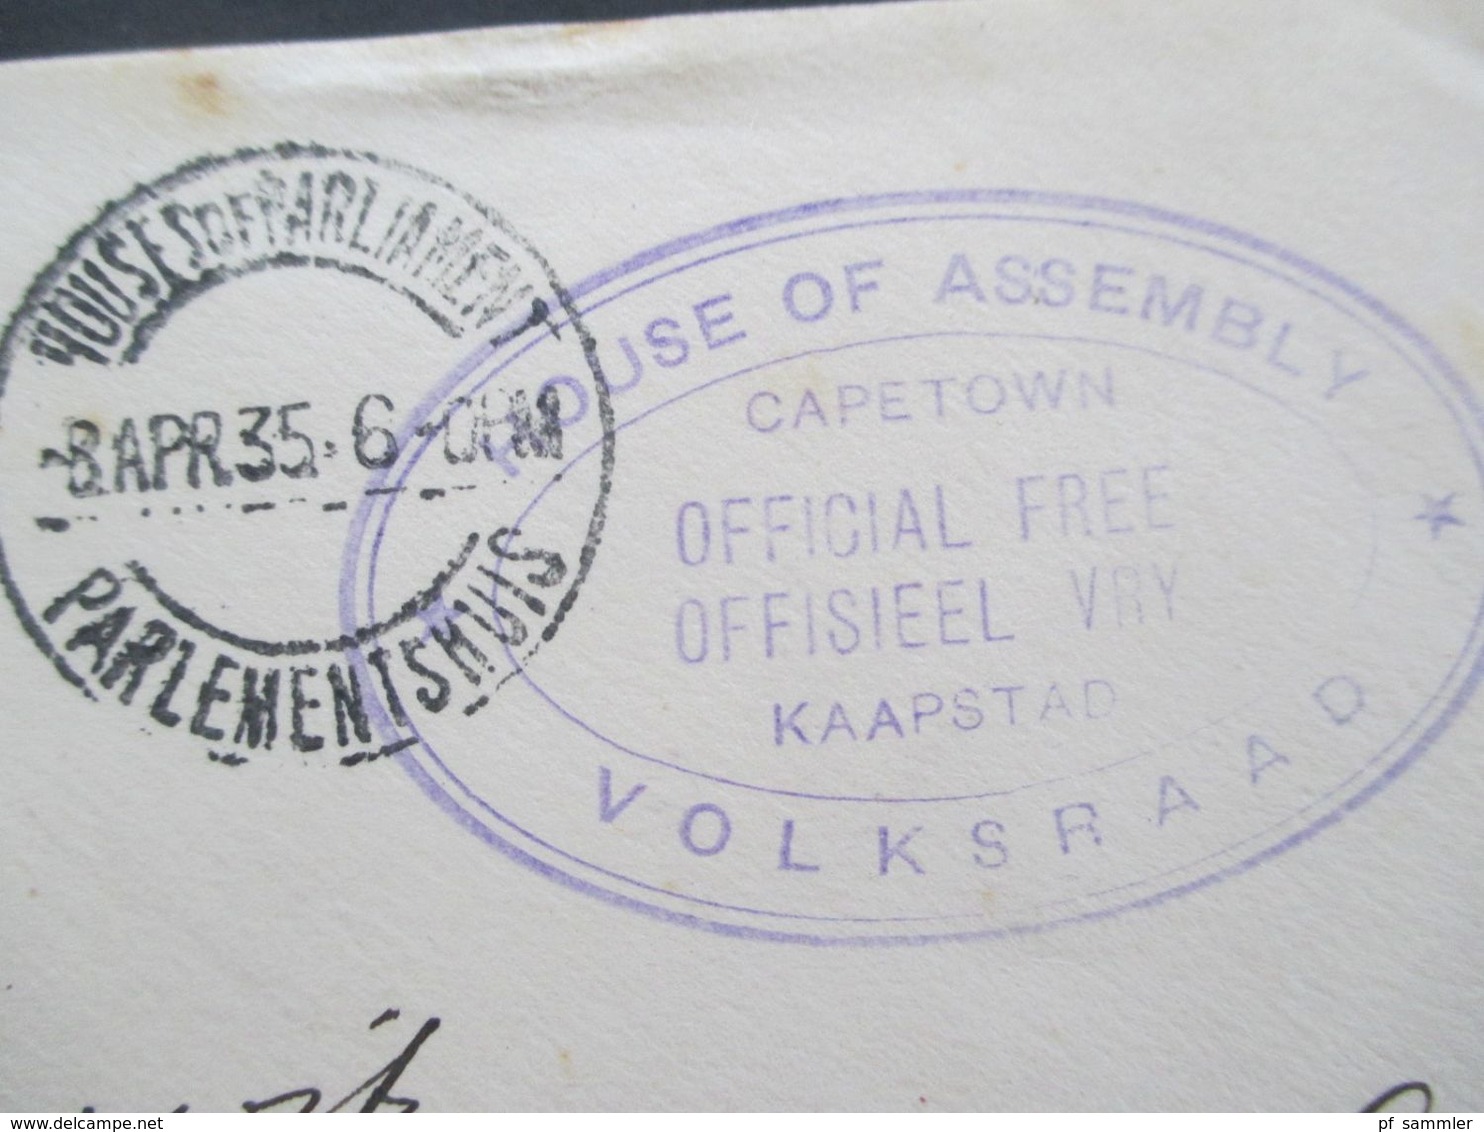 Südafrika 1935 Stempel Houeses Of Parliament Parliament Und House Of Assembly Volksraad Official Free Cape Town - Brieven En Documenten